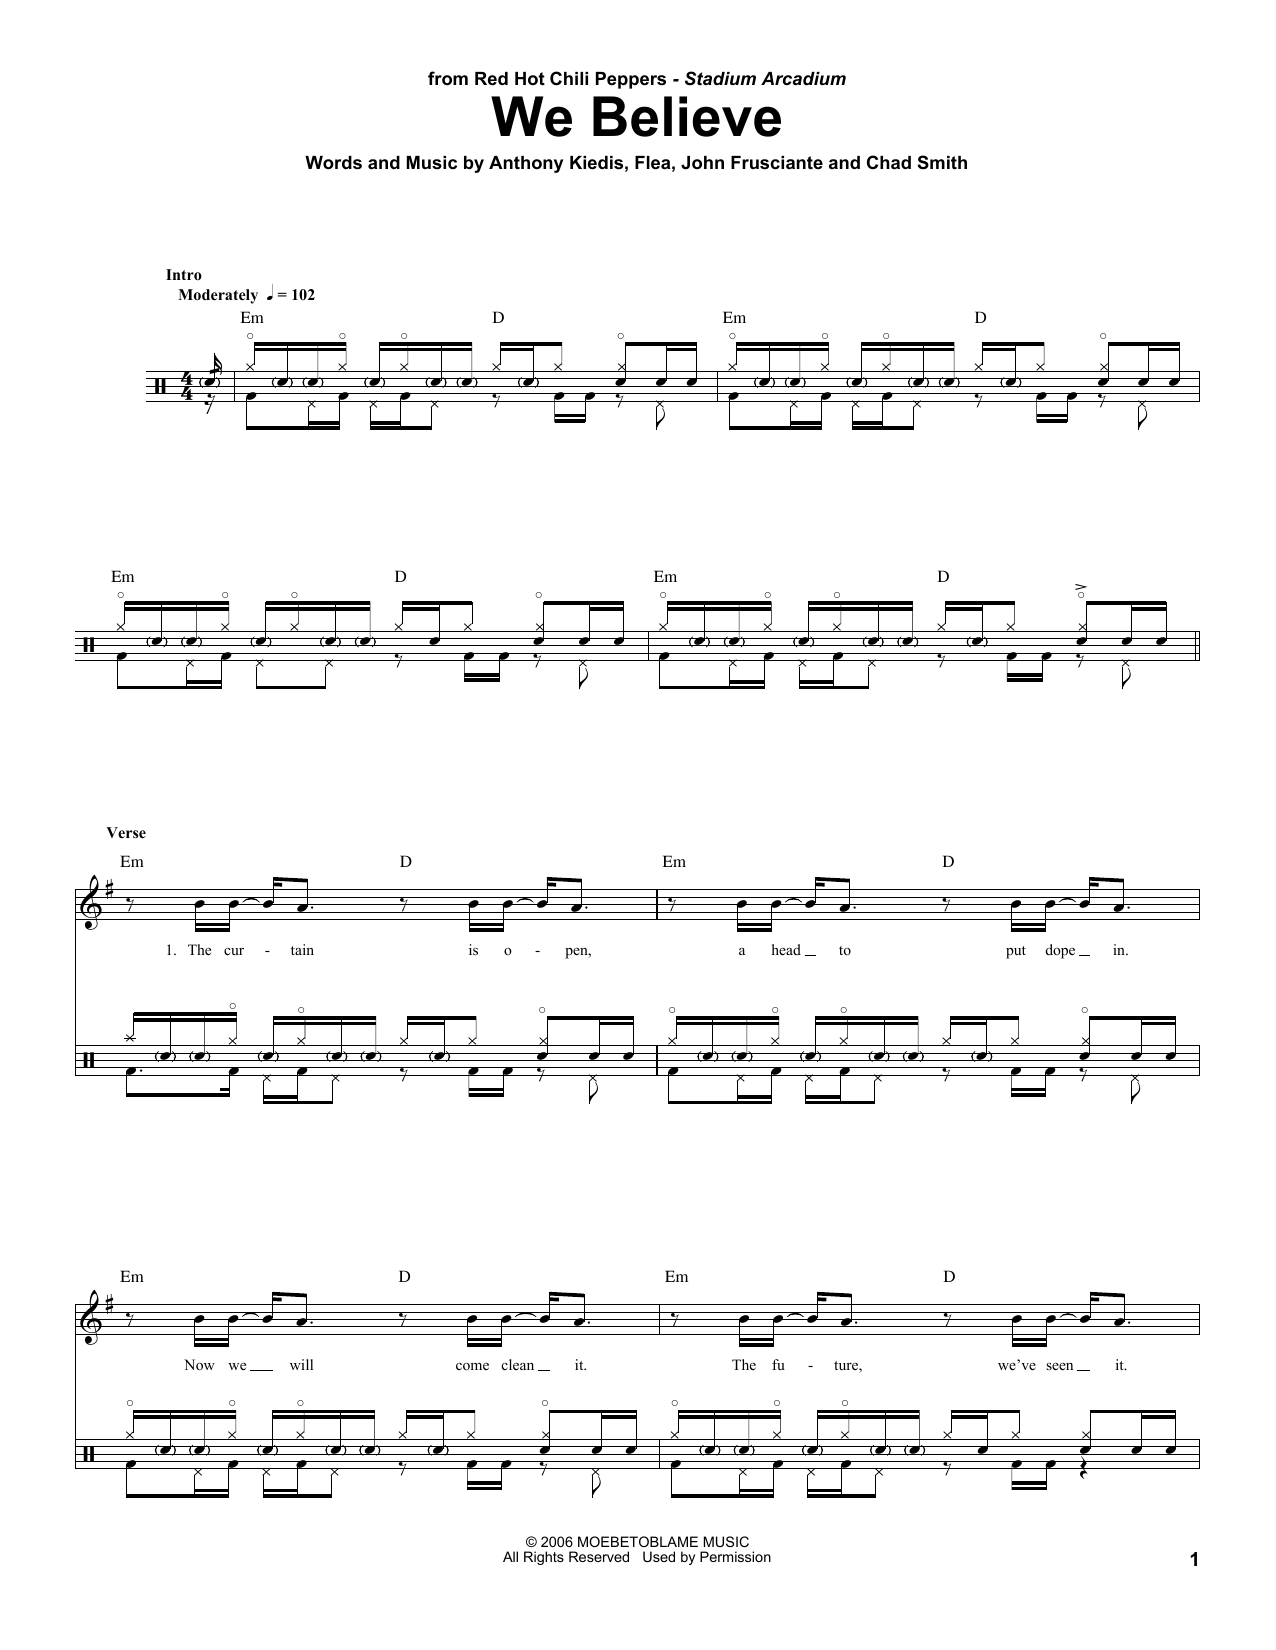 Download Red Hot Chili Peppers We Believe Sheet Music